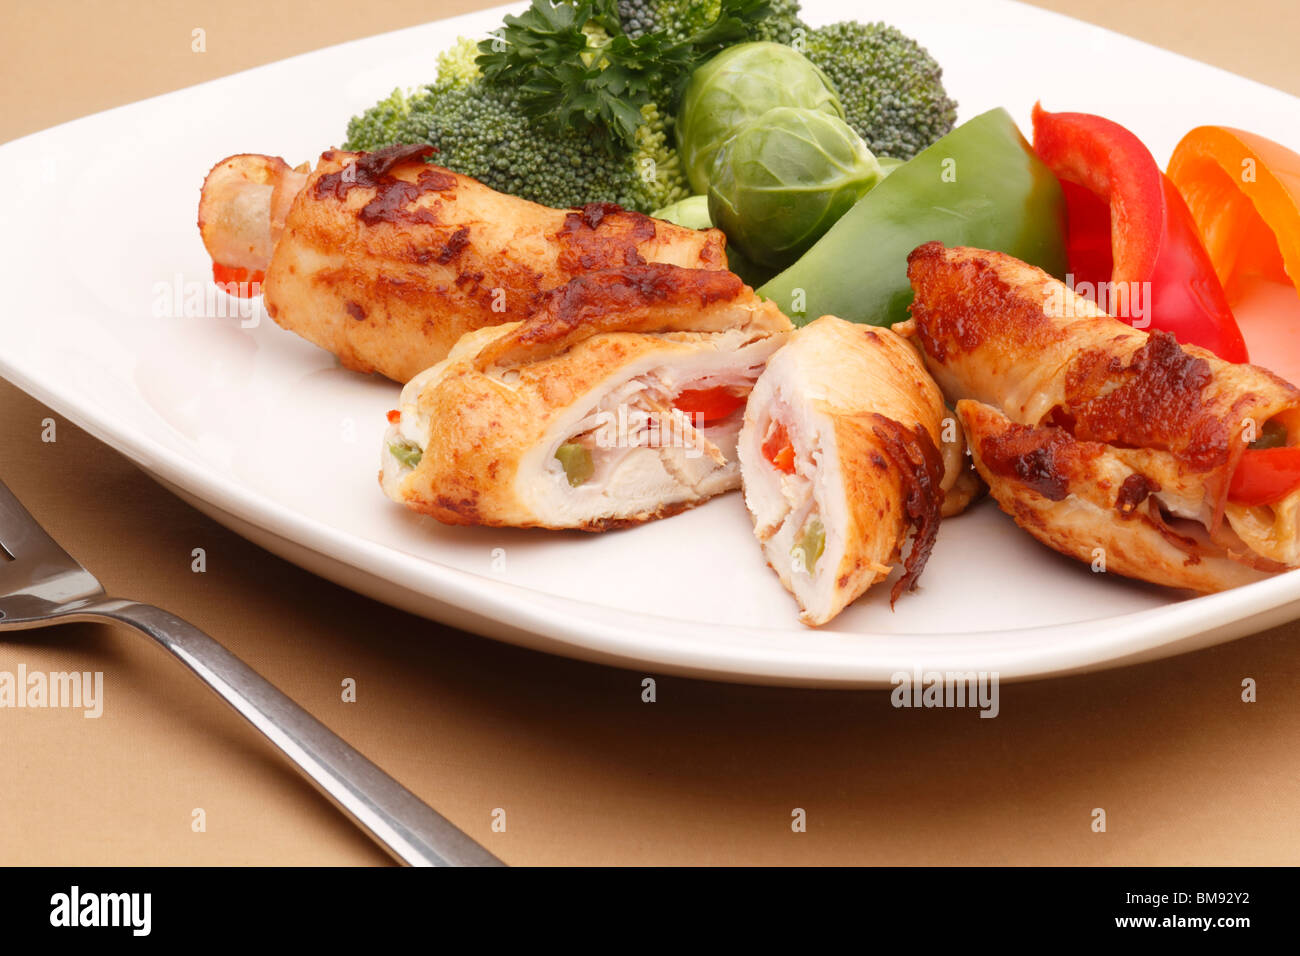 Chicken rolls and fresh vegetables on plate Stock Photo